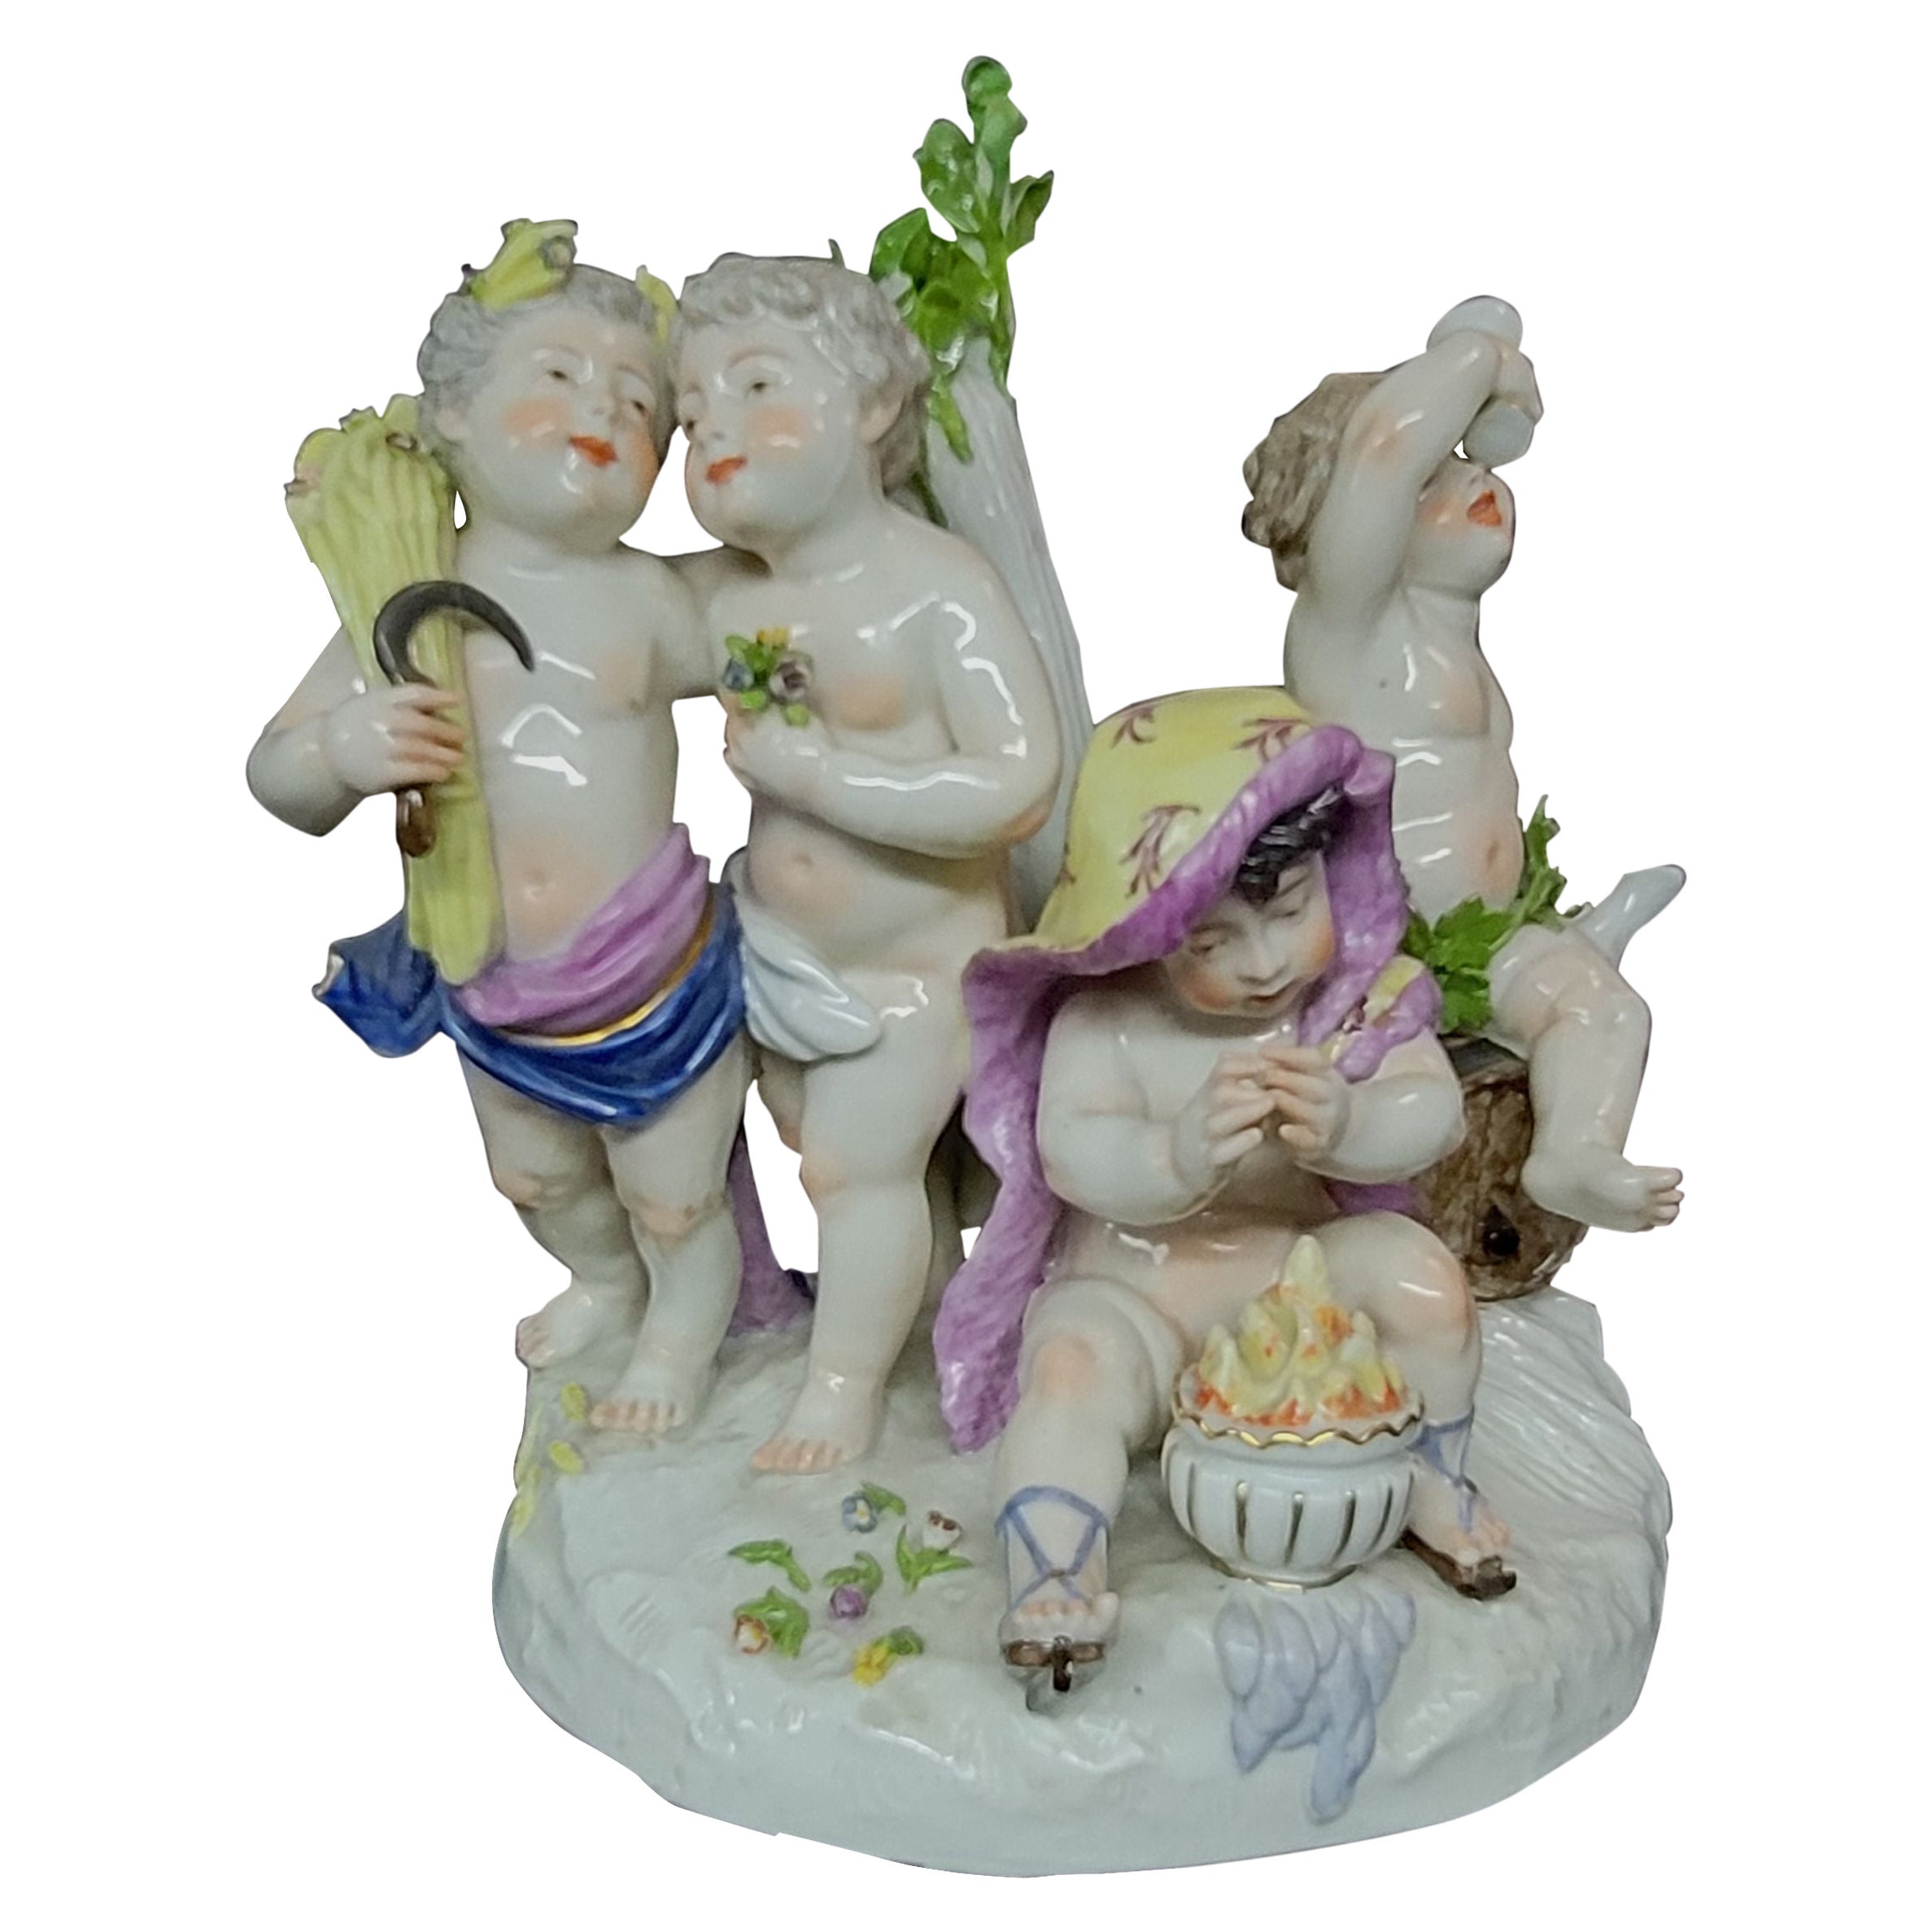 Antique Ludwigsburg Porcelain "Putti" Group, 19th Century